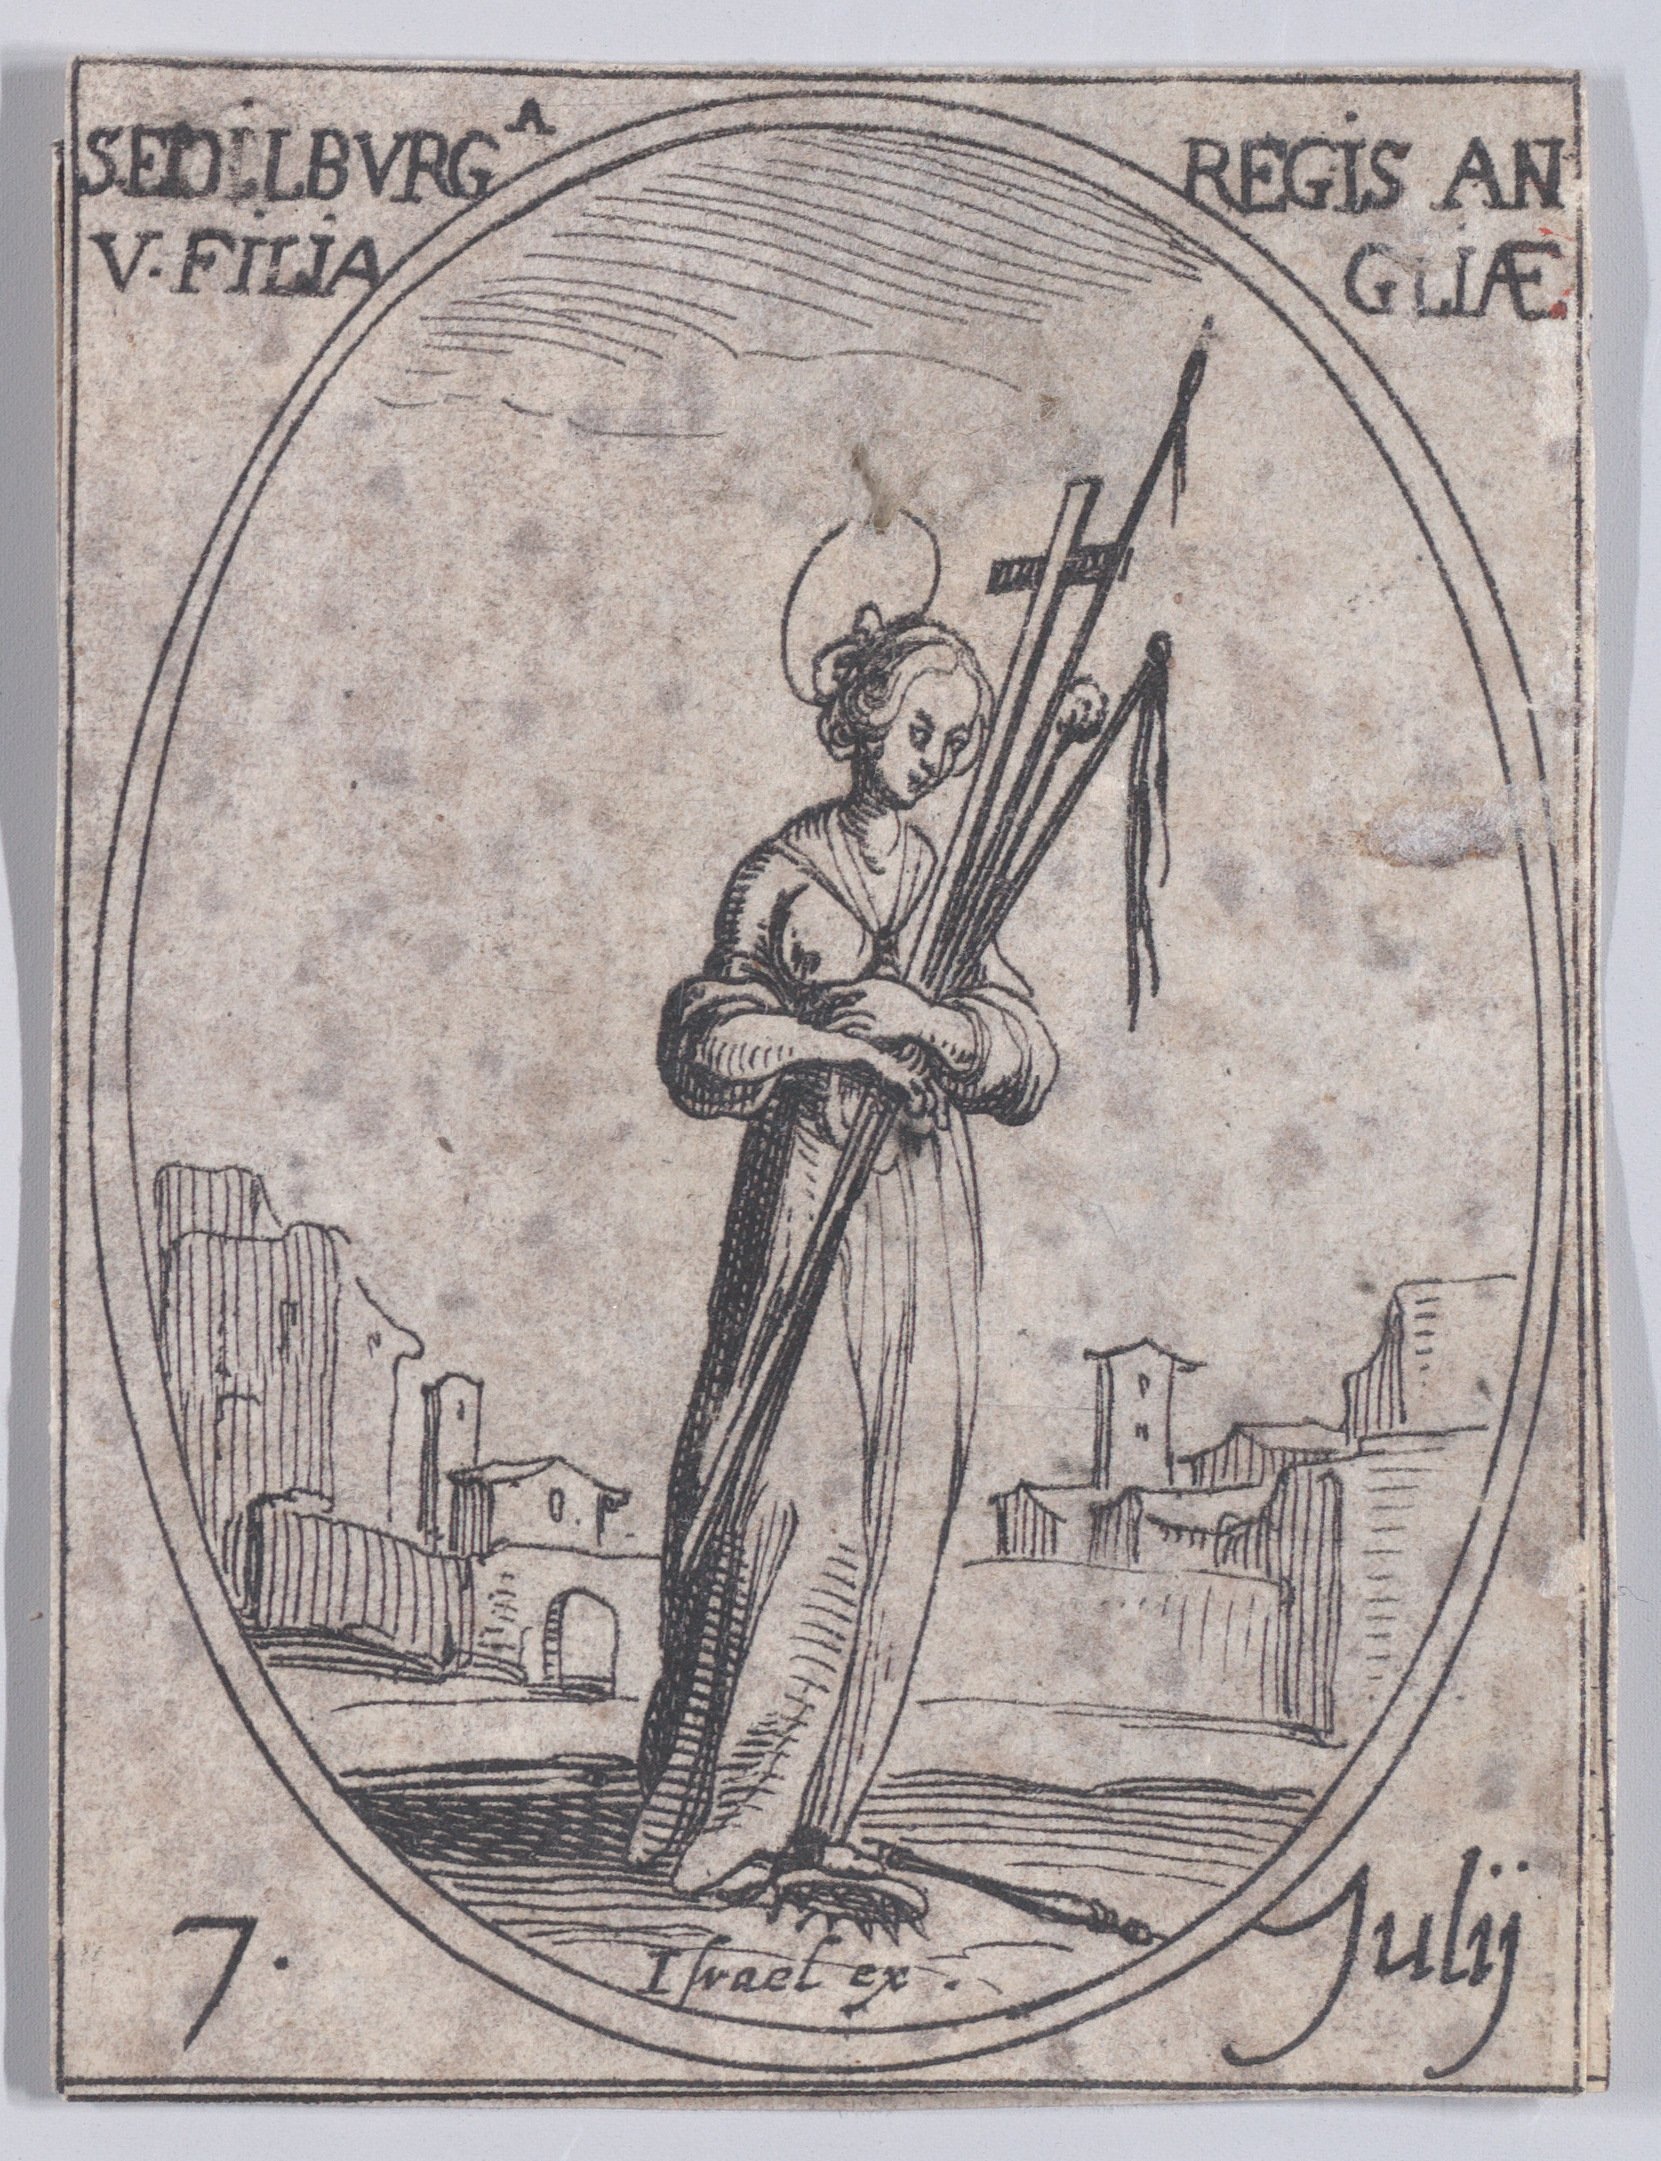 Ste. Edilburge, fille du roi d'Angleterre (St. Ethelburga, Daughter of the King of England), July 7th, from Les Images De Tous Les Saincts et Saintes de L'Année (Images of All of the Saints and Religious Events of the Year), Jacques Callot (French, Nancy 1592–1635 Nancy), Etching; second state of two (Lieure)